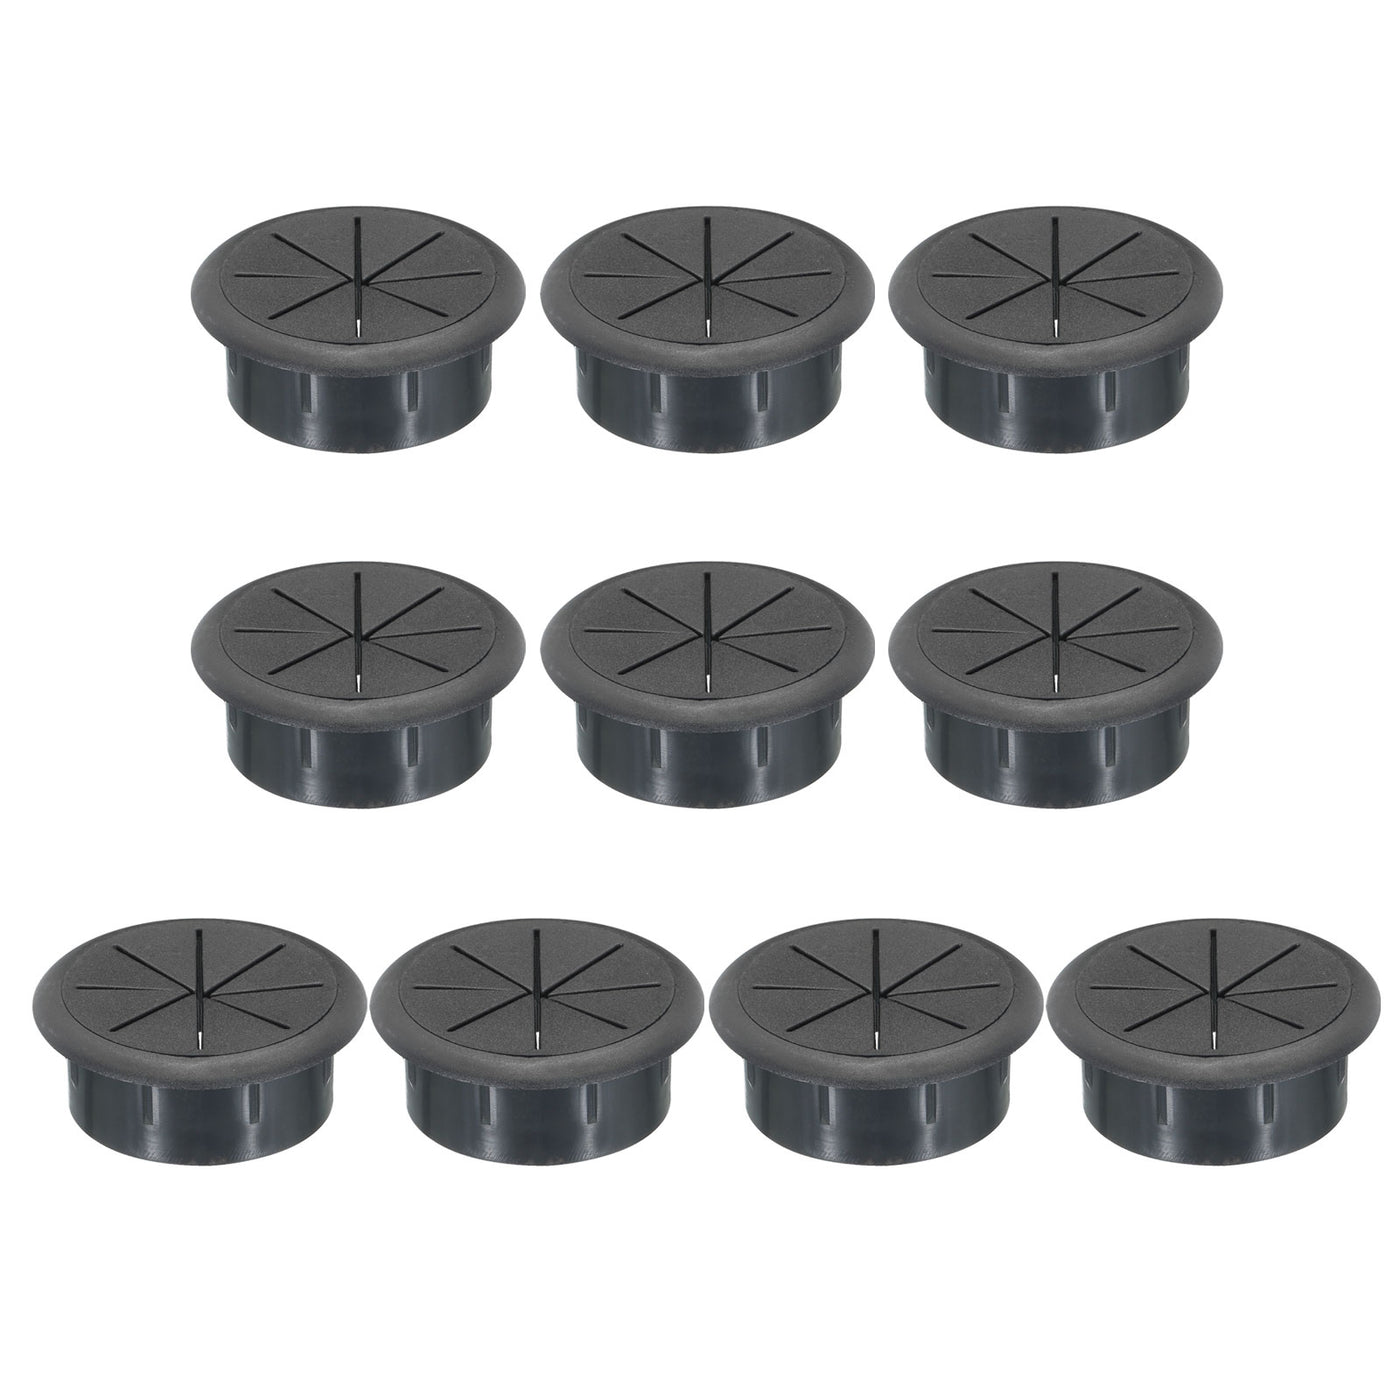 uxcell Uxcell 10pcs 50mm Mounting Dia Black Plastic Cable Snap Locking Bushing Grommet